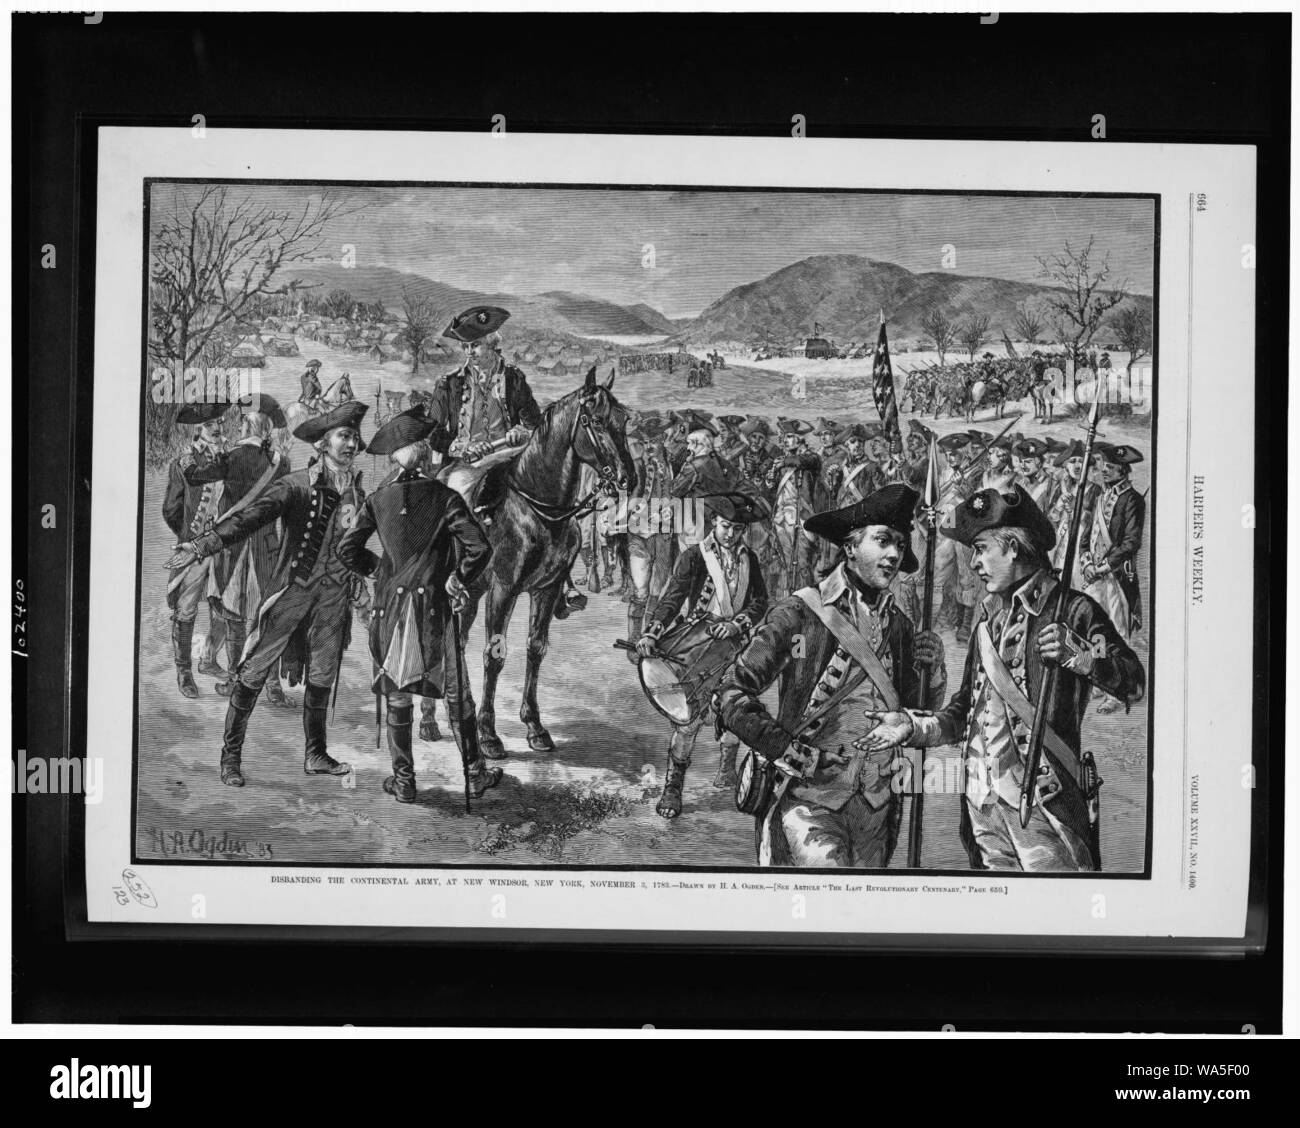 Disbanding the Continental Army, at New Windsor, New York, November 3, 1783 - drawn by H.A. Ogden. Stock Photo